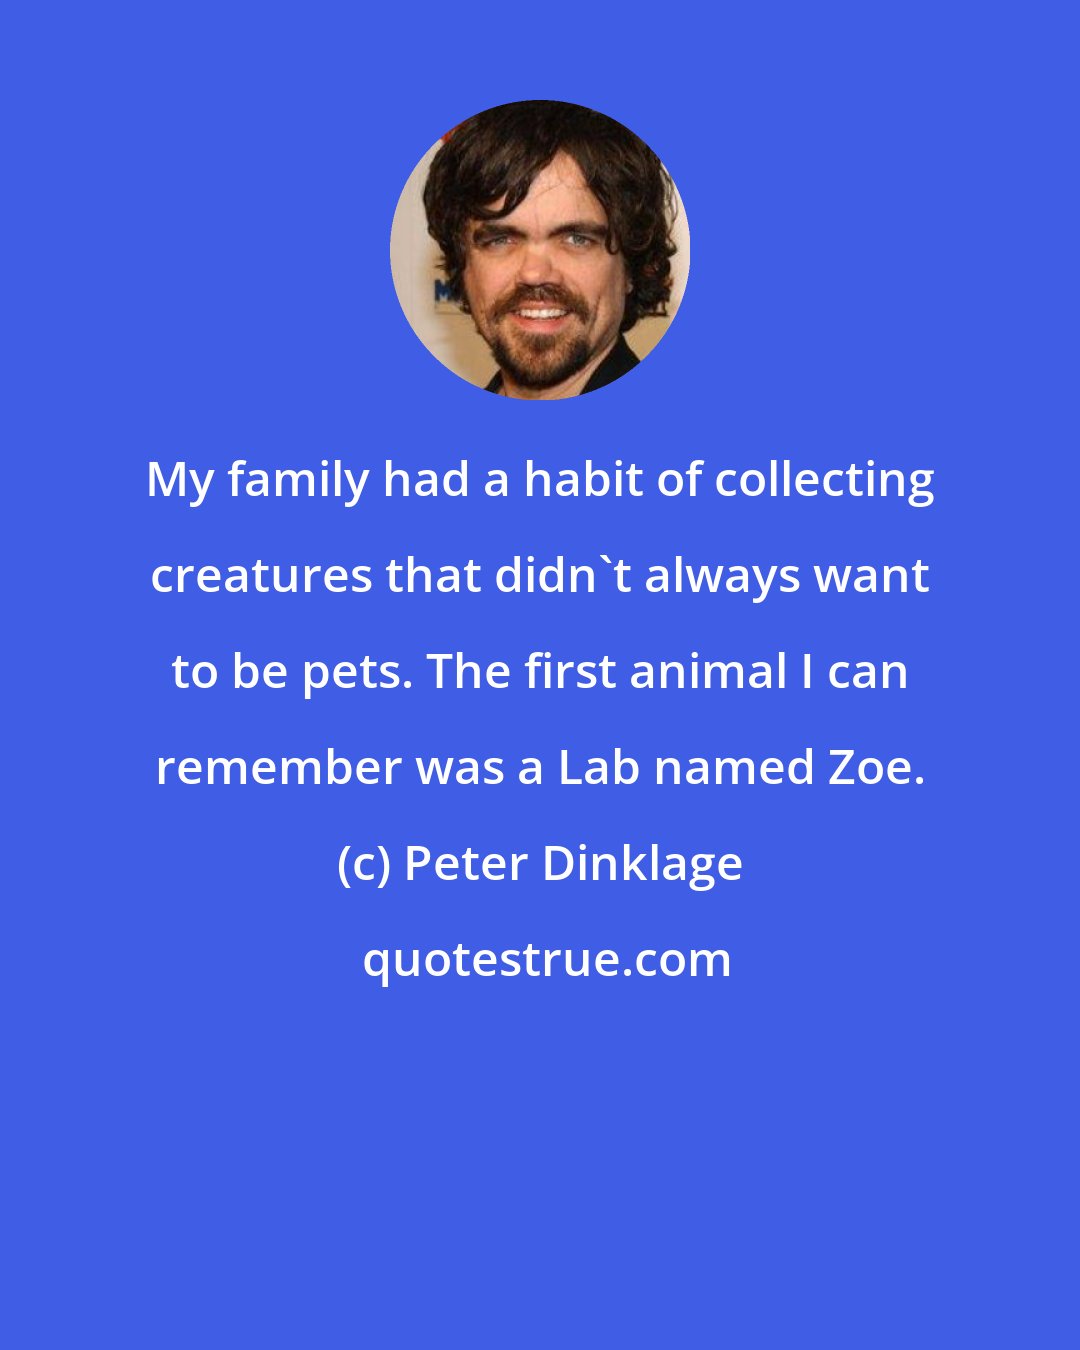 Peter Dinklage: My family had a habit of collecting creatures that didn't always want to be pets. The first animal I can remember was a Lab named Zoe.